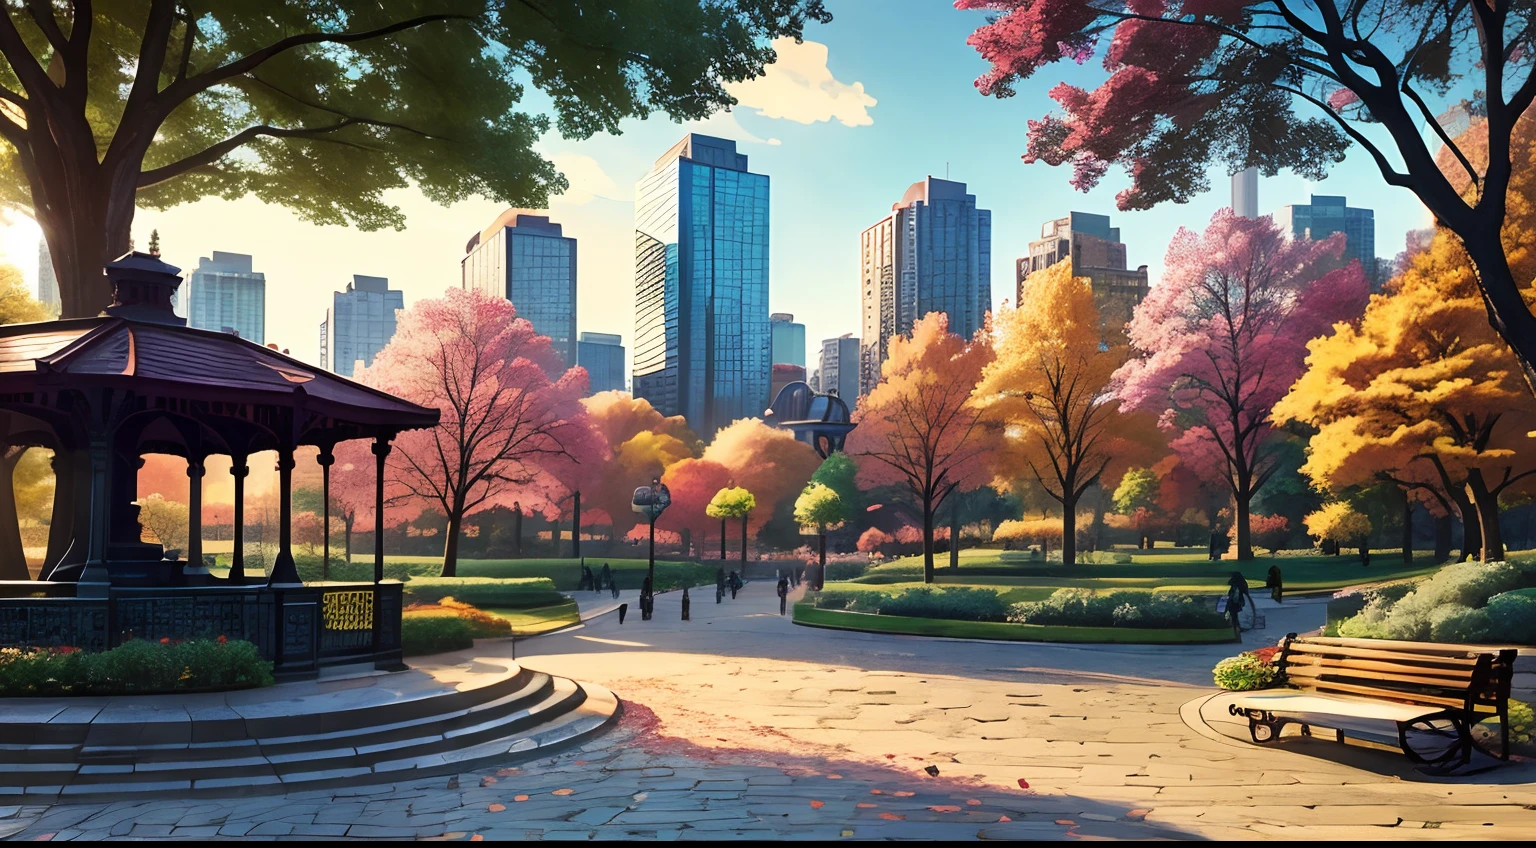 (best quality:1.0), a vibrant park in the middle of a bright cityscape, trees, benches, 1 statue, 1 gazebo, cobblestone paths, comics style, bright